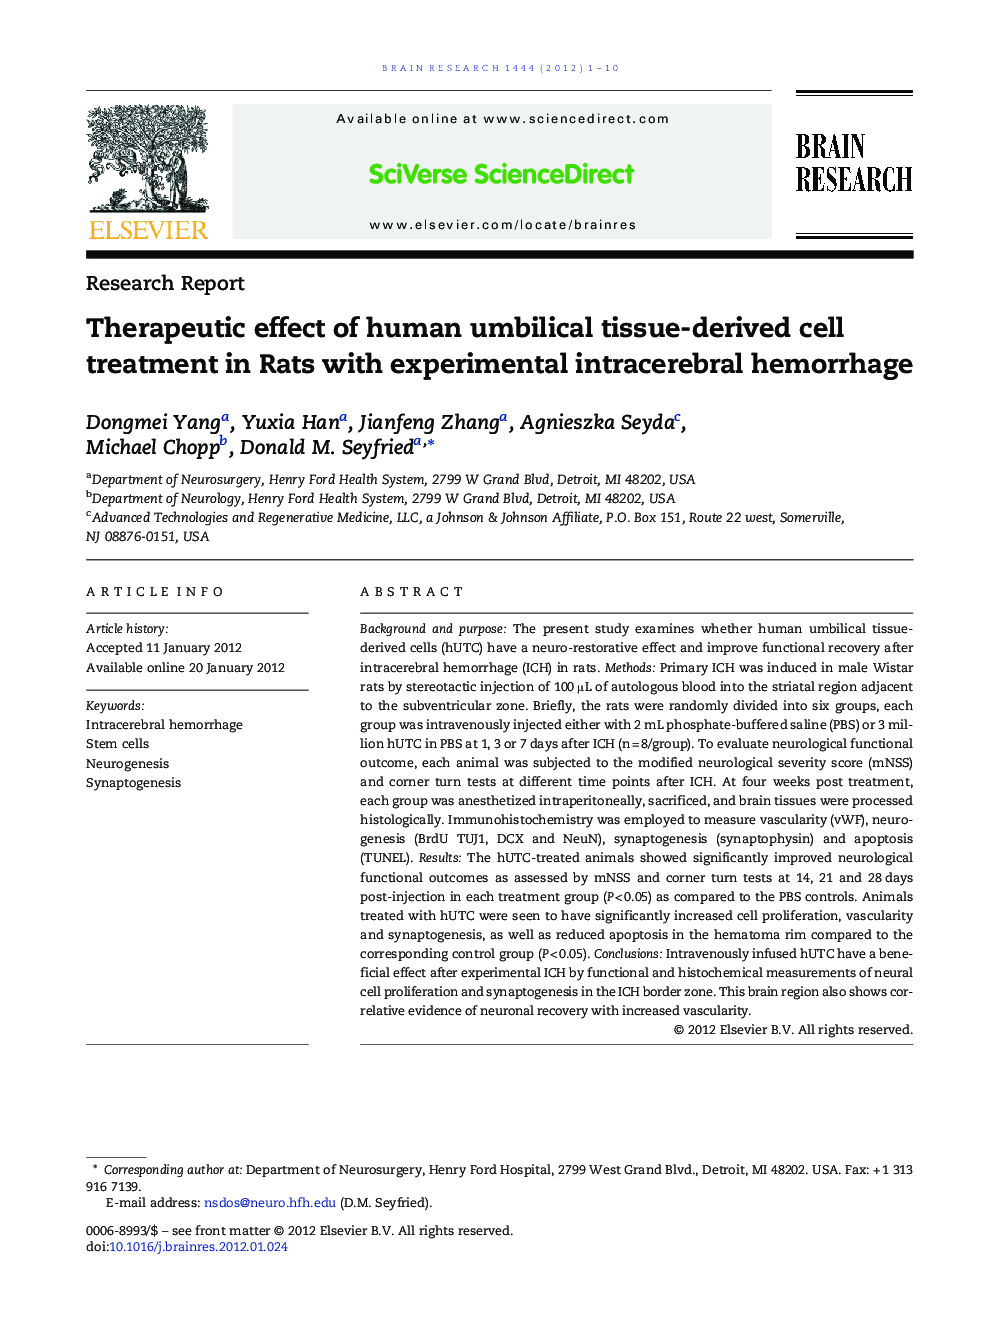 Therapeutic effect of human umbilical tissue-derived cell treatment in Rats with experimental intracerebral hemorrhage